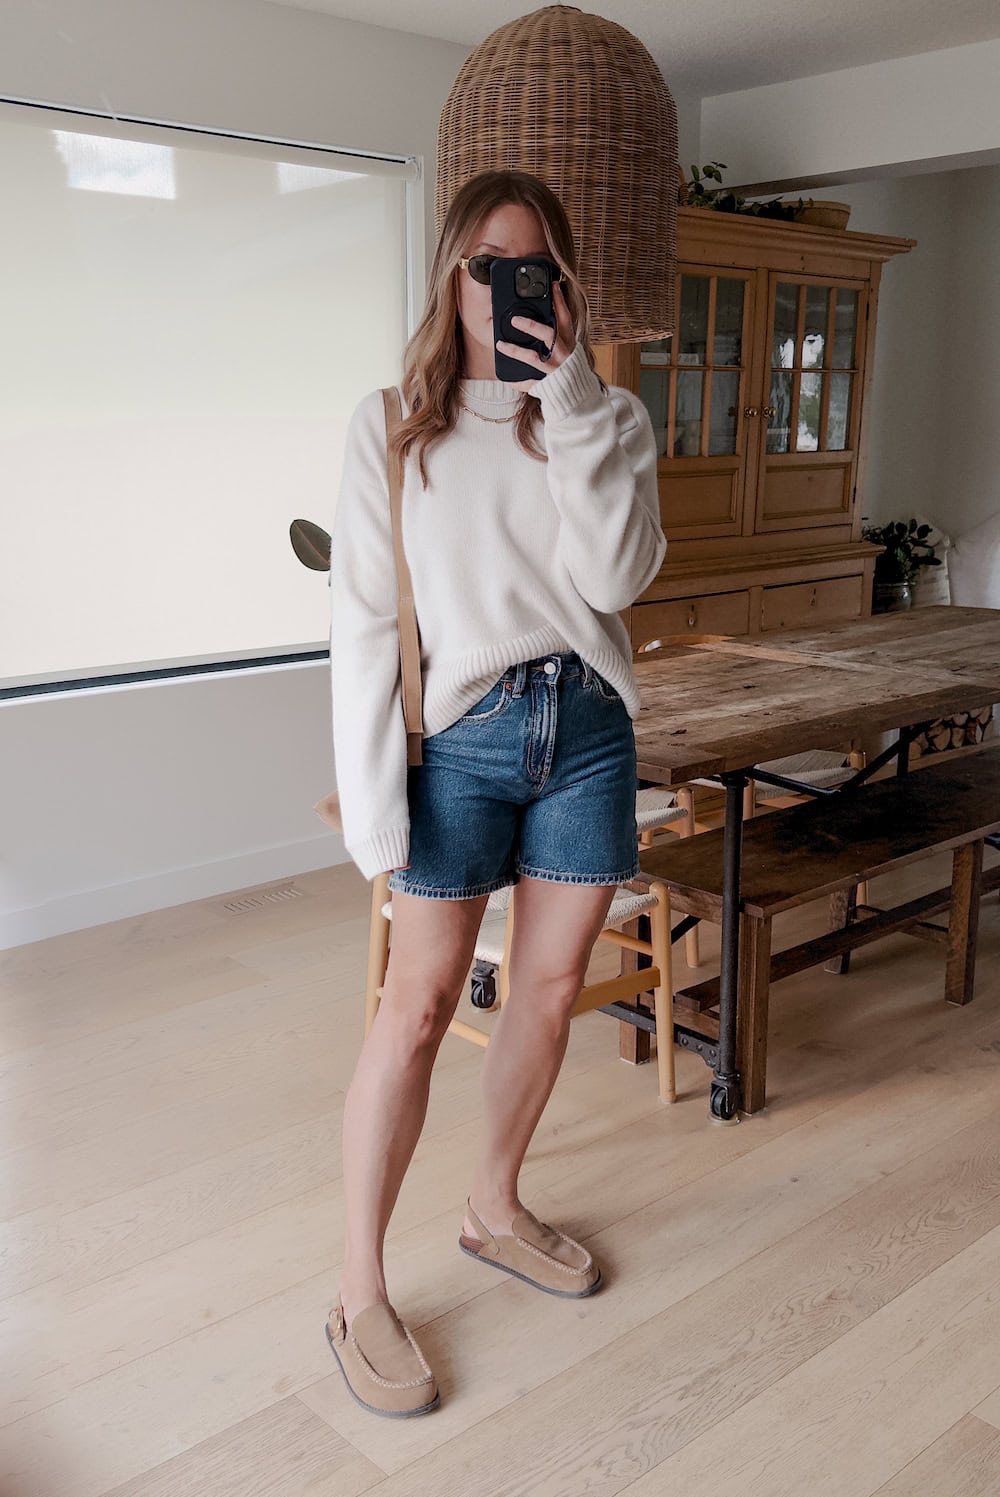 Christal wearing denim shorts with a white sweater and cozy shoes.